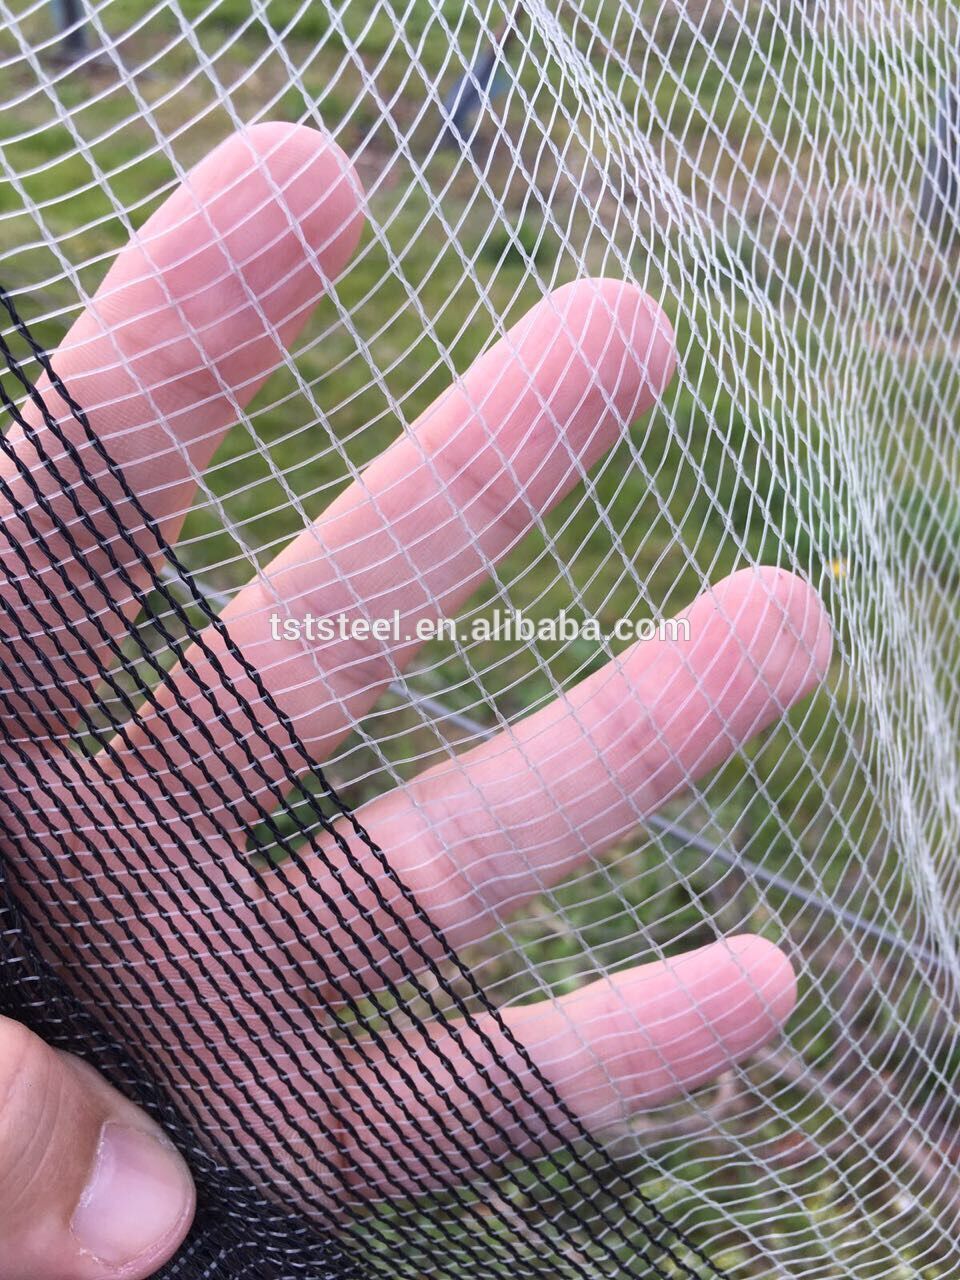 China factory direct hdpe 4mmx5mm anti hail net installation hail net/anti hail net system/anti hail nets for agriculture